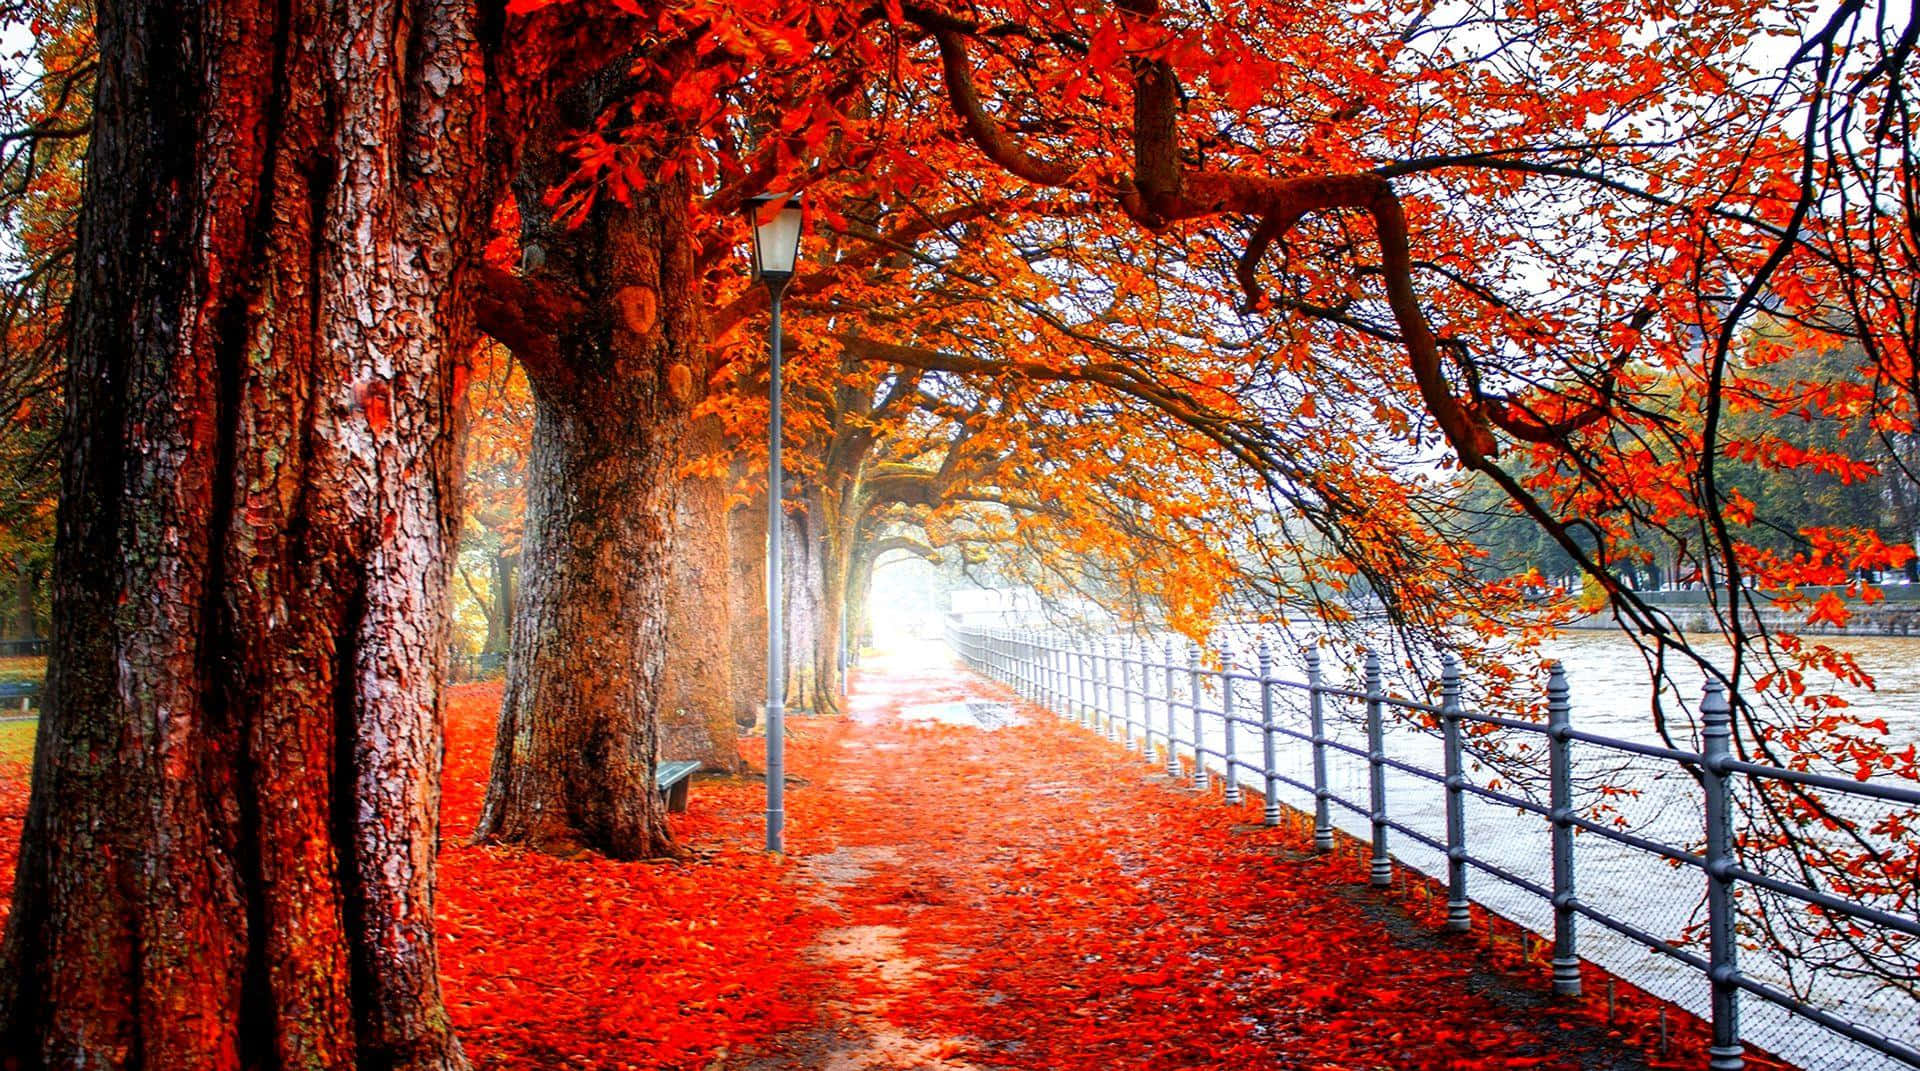 A bright red tree shimmering in the sunlight Wallpaper